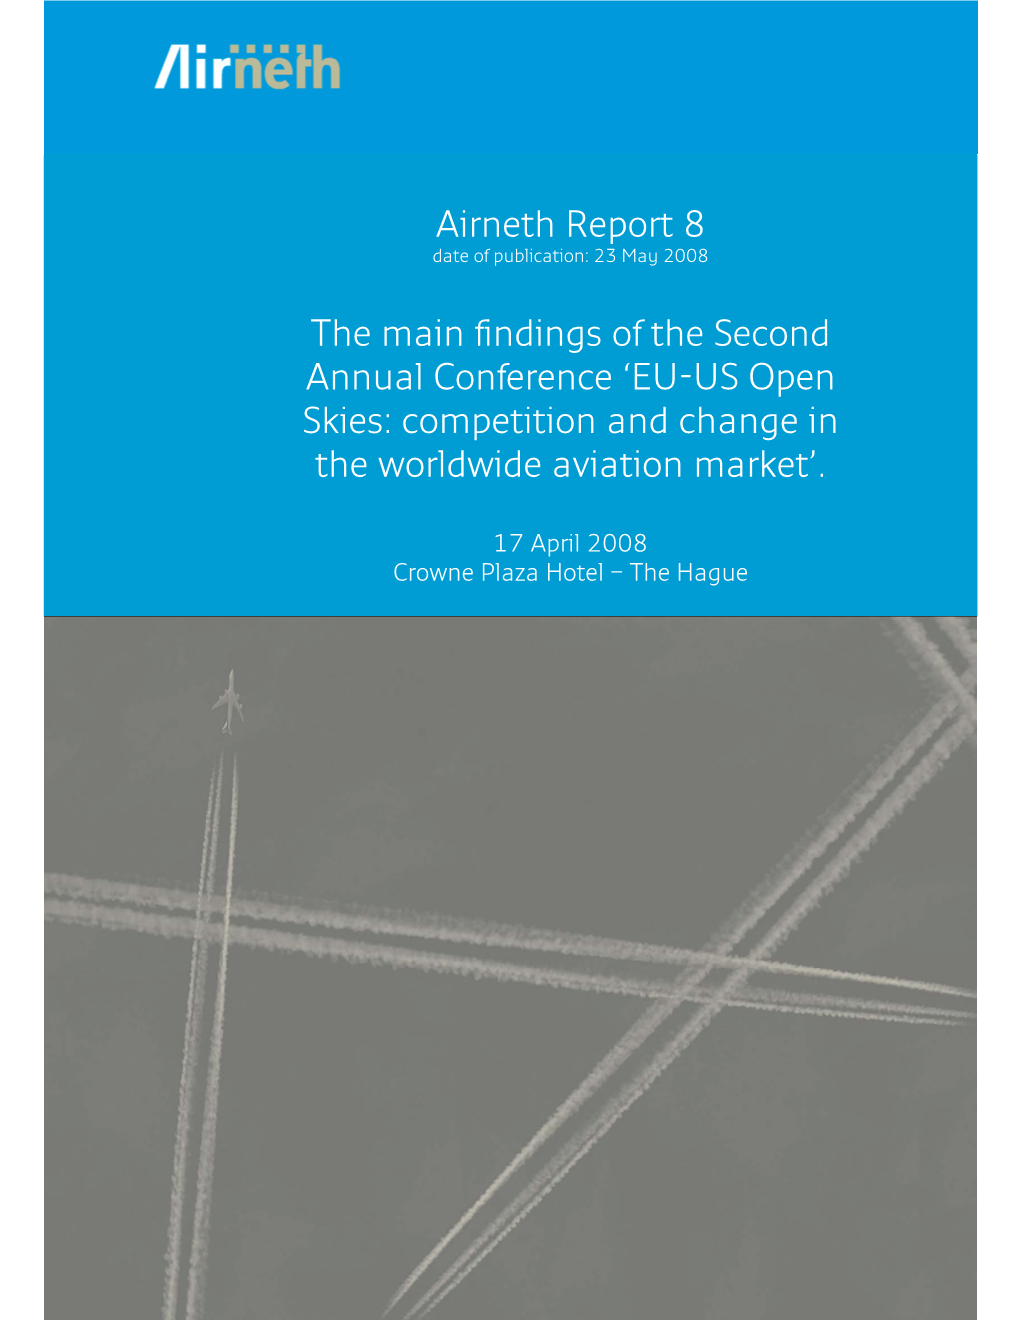 Airneth Report 8 the Main Findings of the Second Annual Conference 'EU